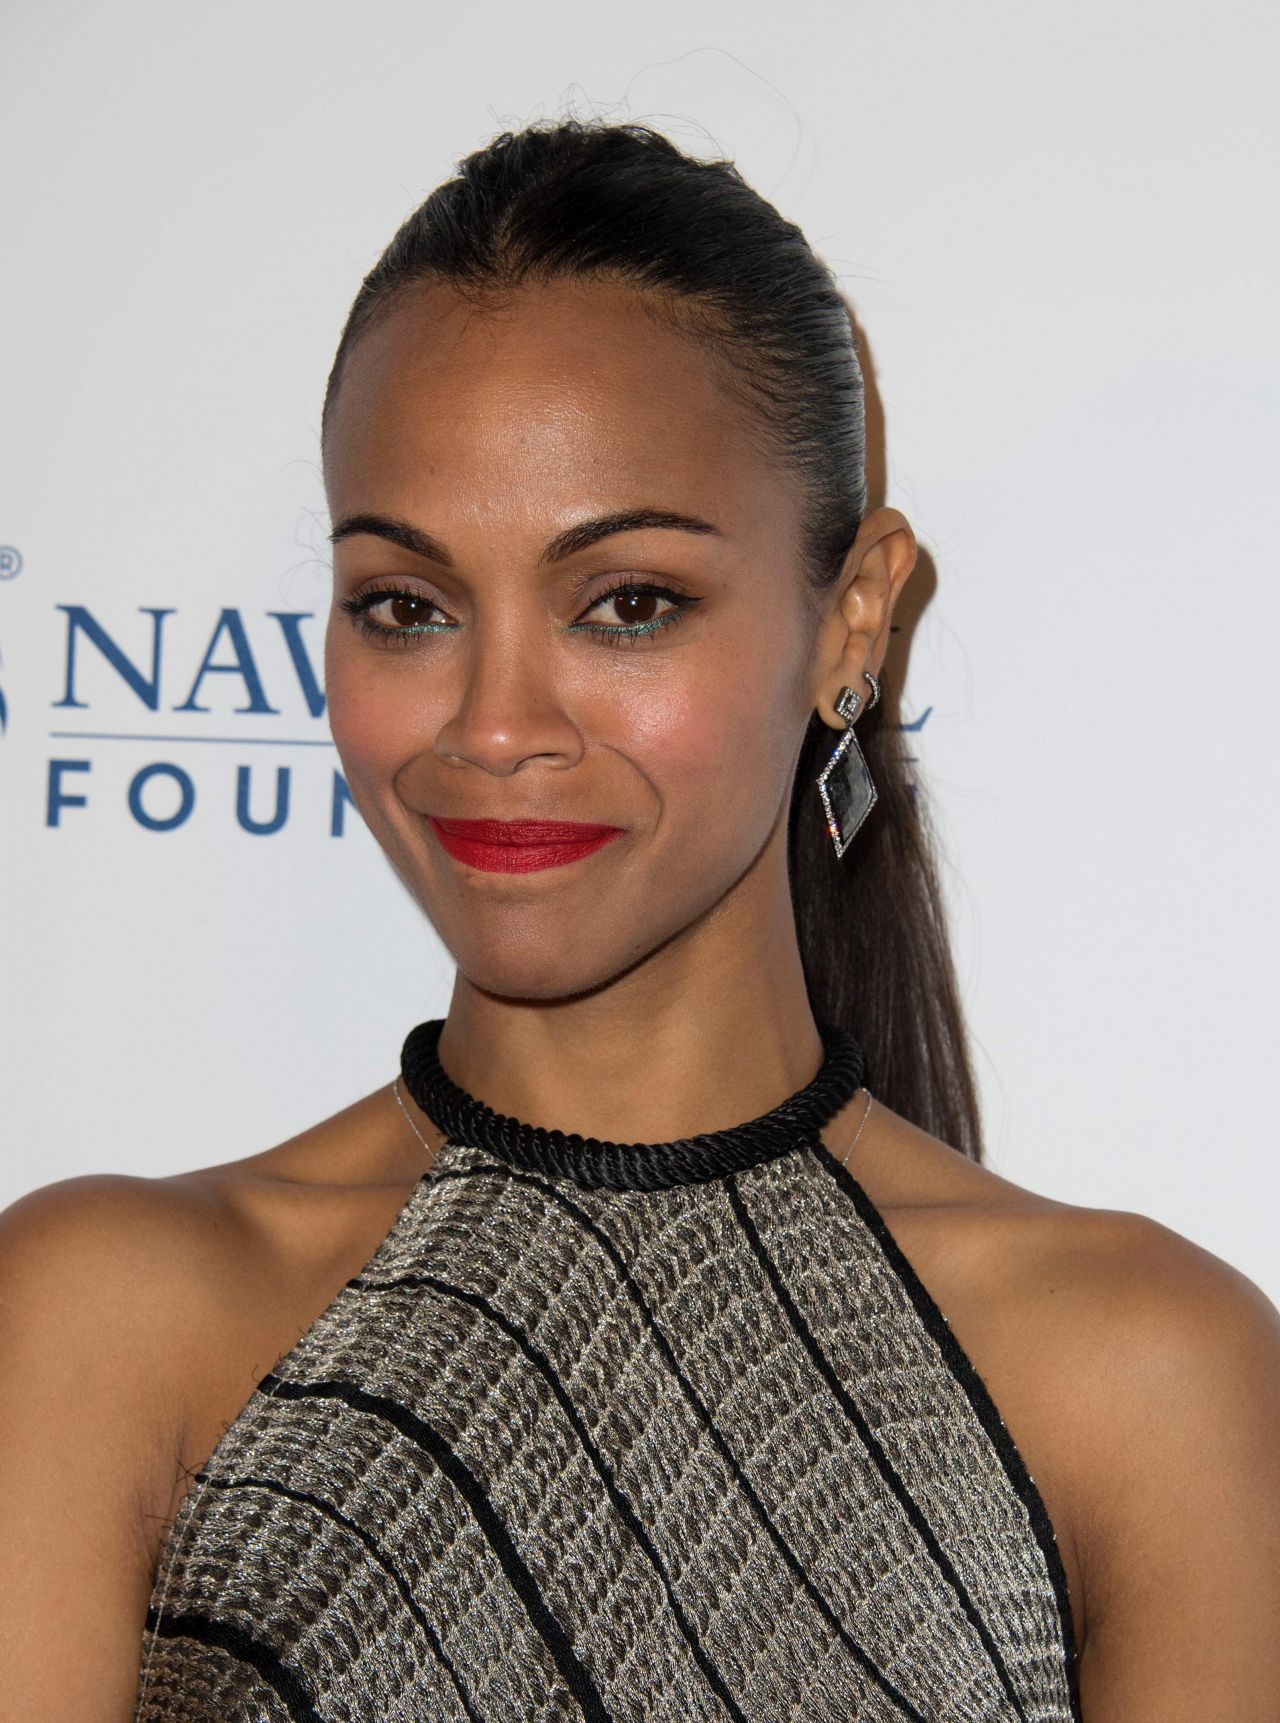 Zoe Saldana La Evening Of Tribute Benefiting The Navy Seal Foundation 11109 Hot Sex Picture